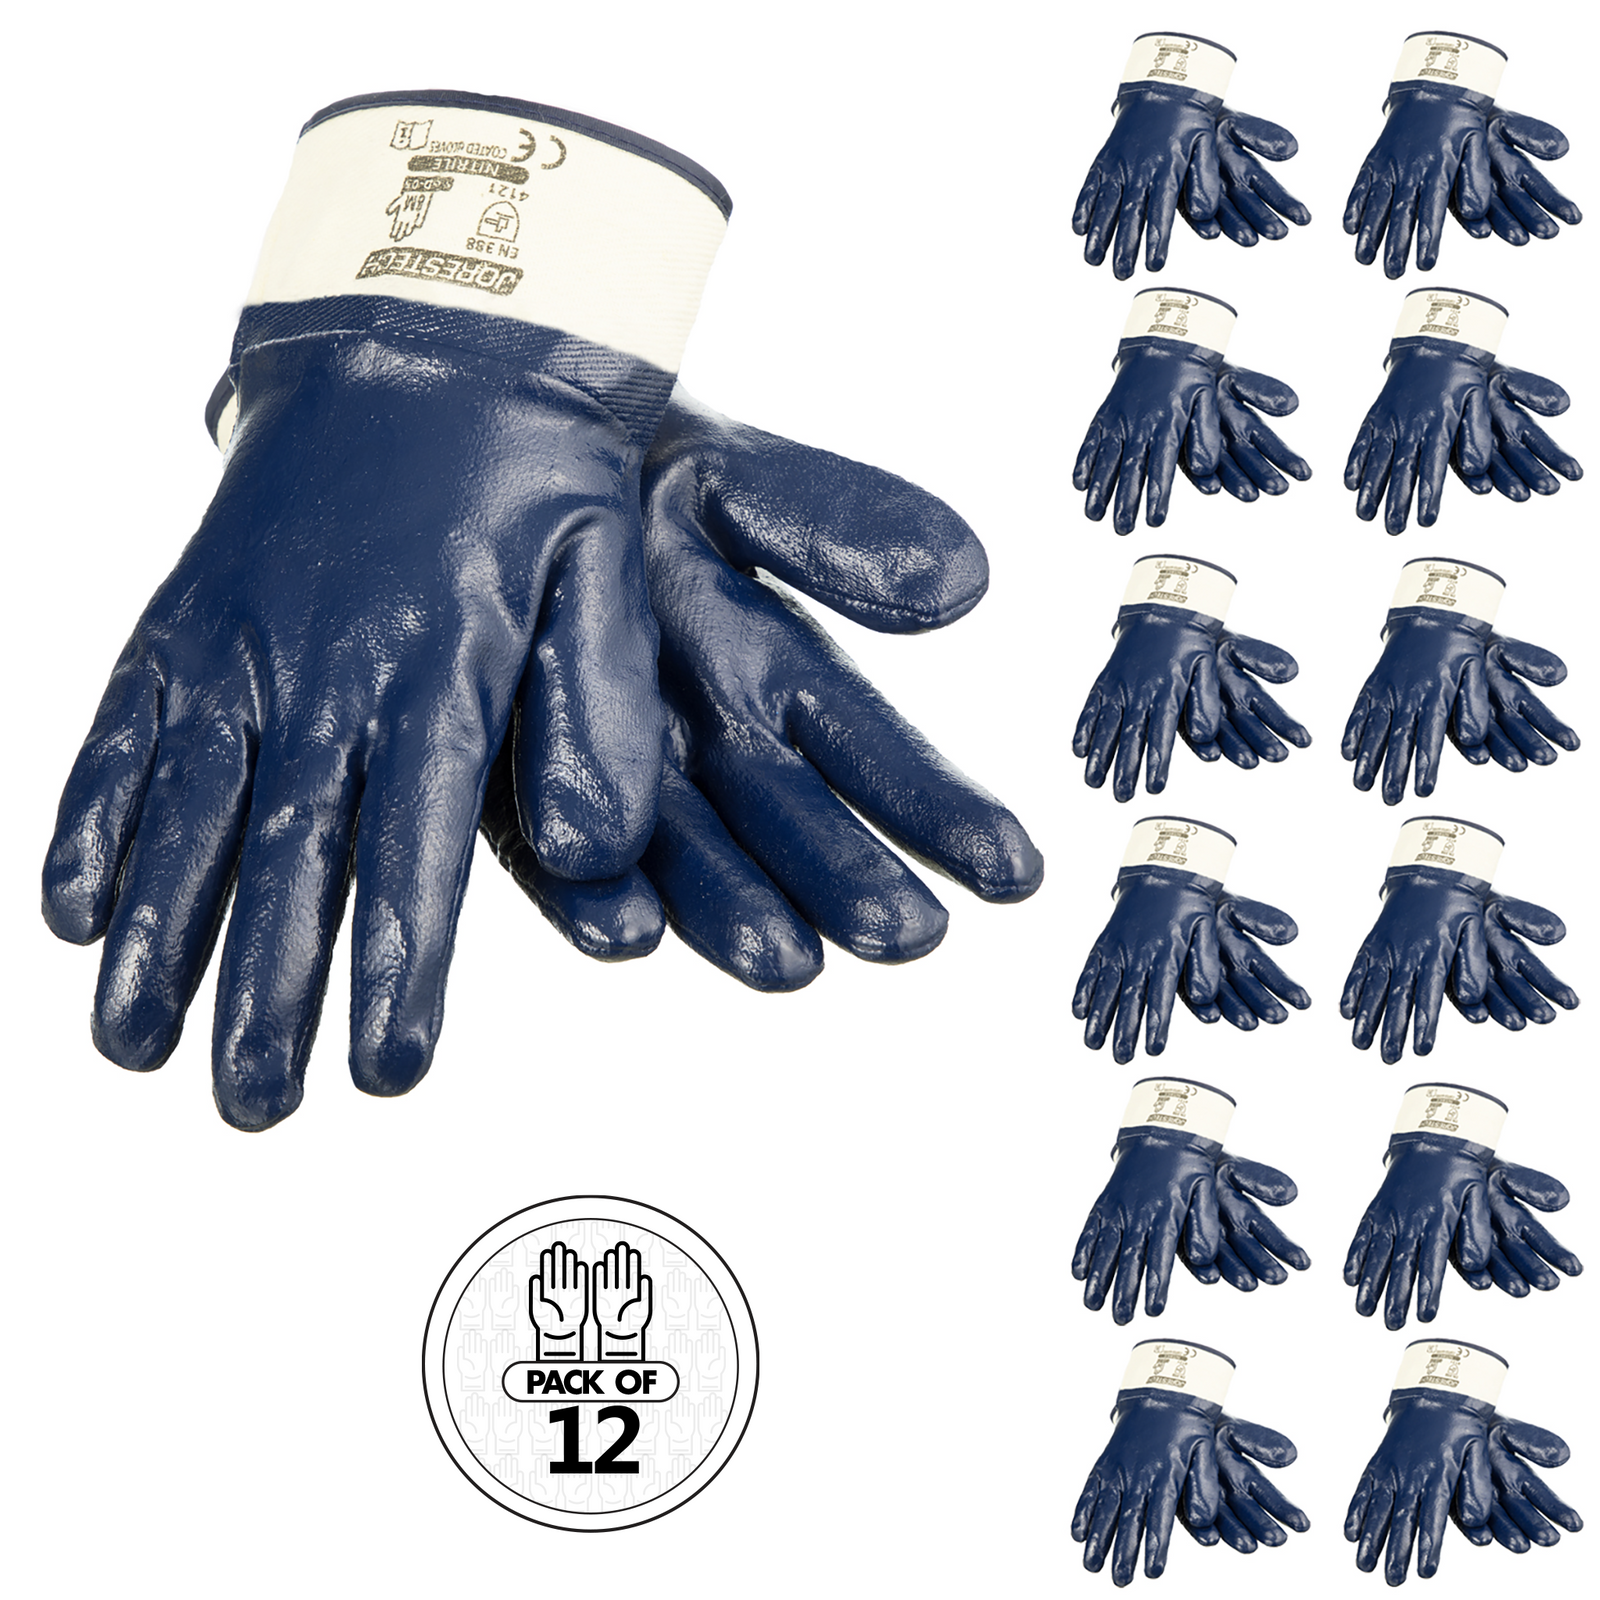 JORESTECH nitrile coated safety work gloves as pack of 12